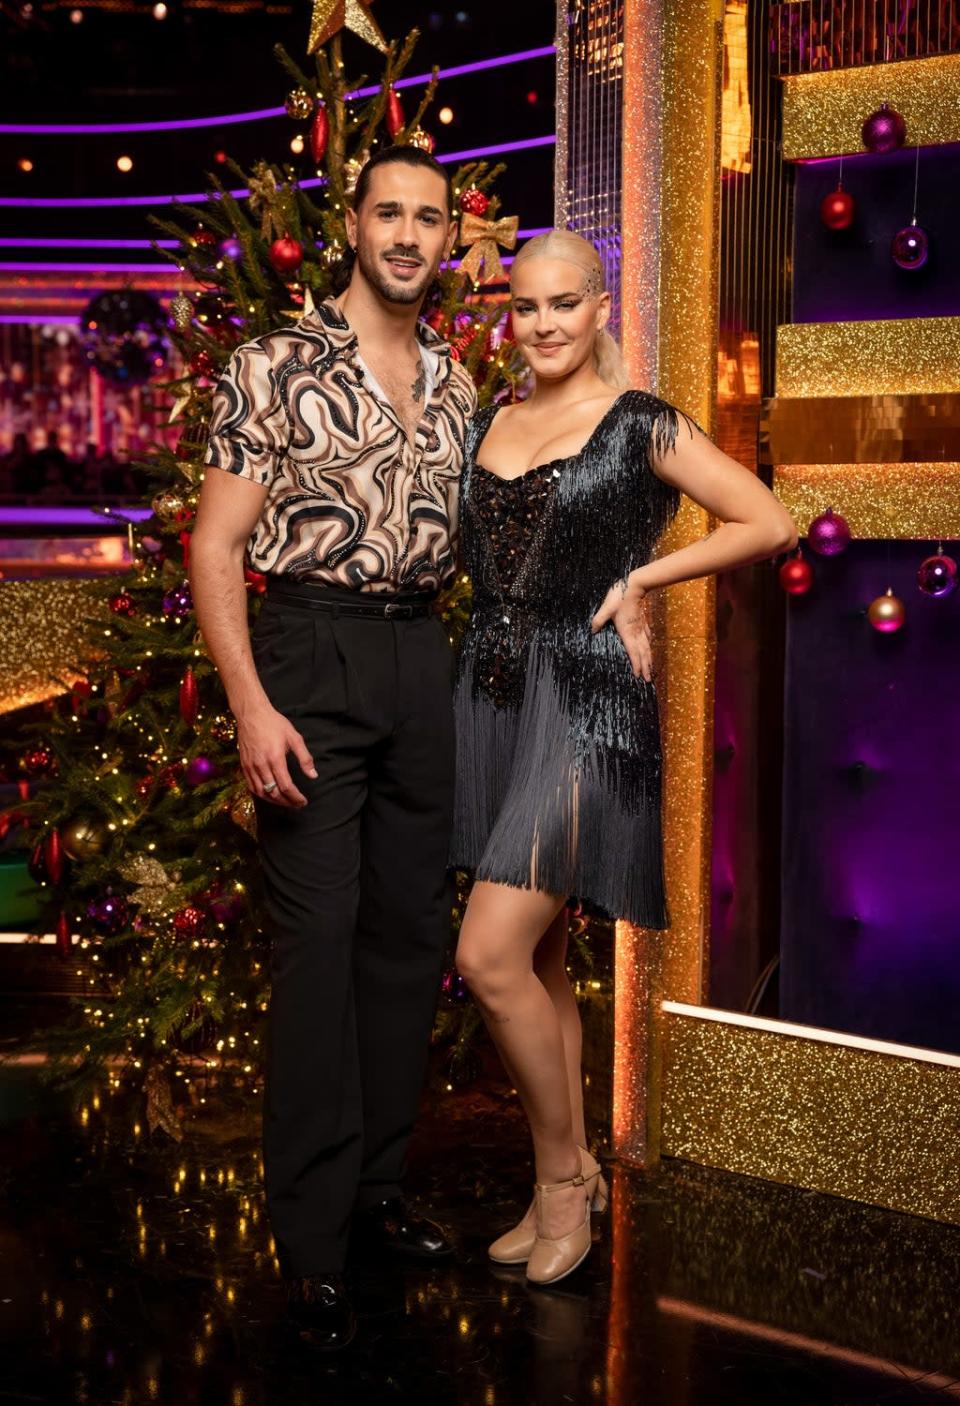 Anne Marie and her dance partner Graziano Di Prima were the winners of the Strictly Christmas special (BBC/PA) (PA Media)